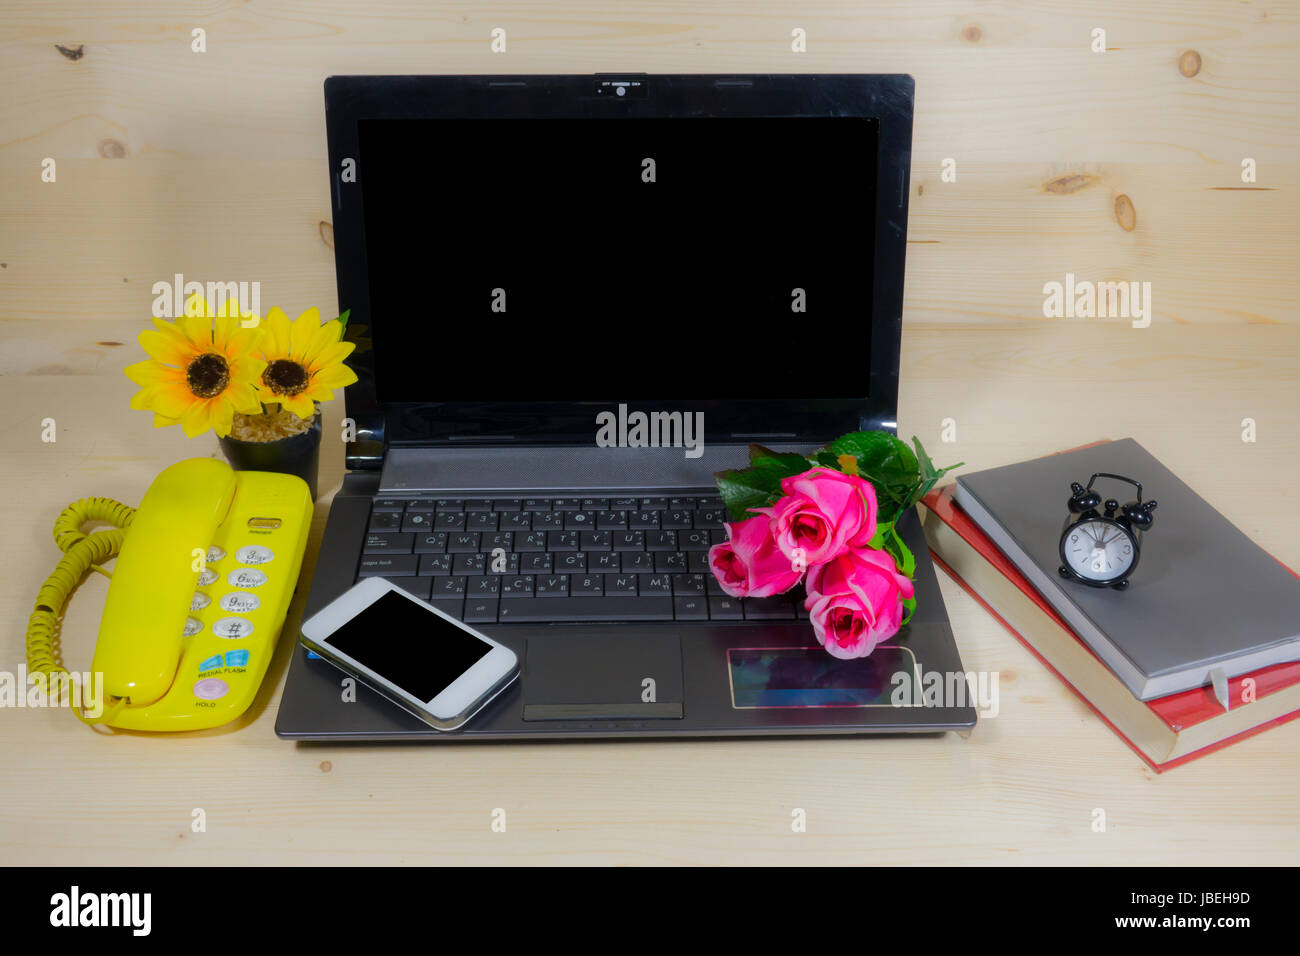 Working desk with many flowers on the laptop, phone, clock Stock Photo